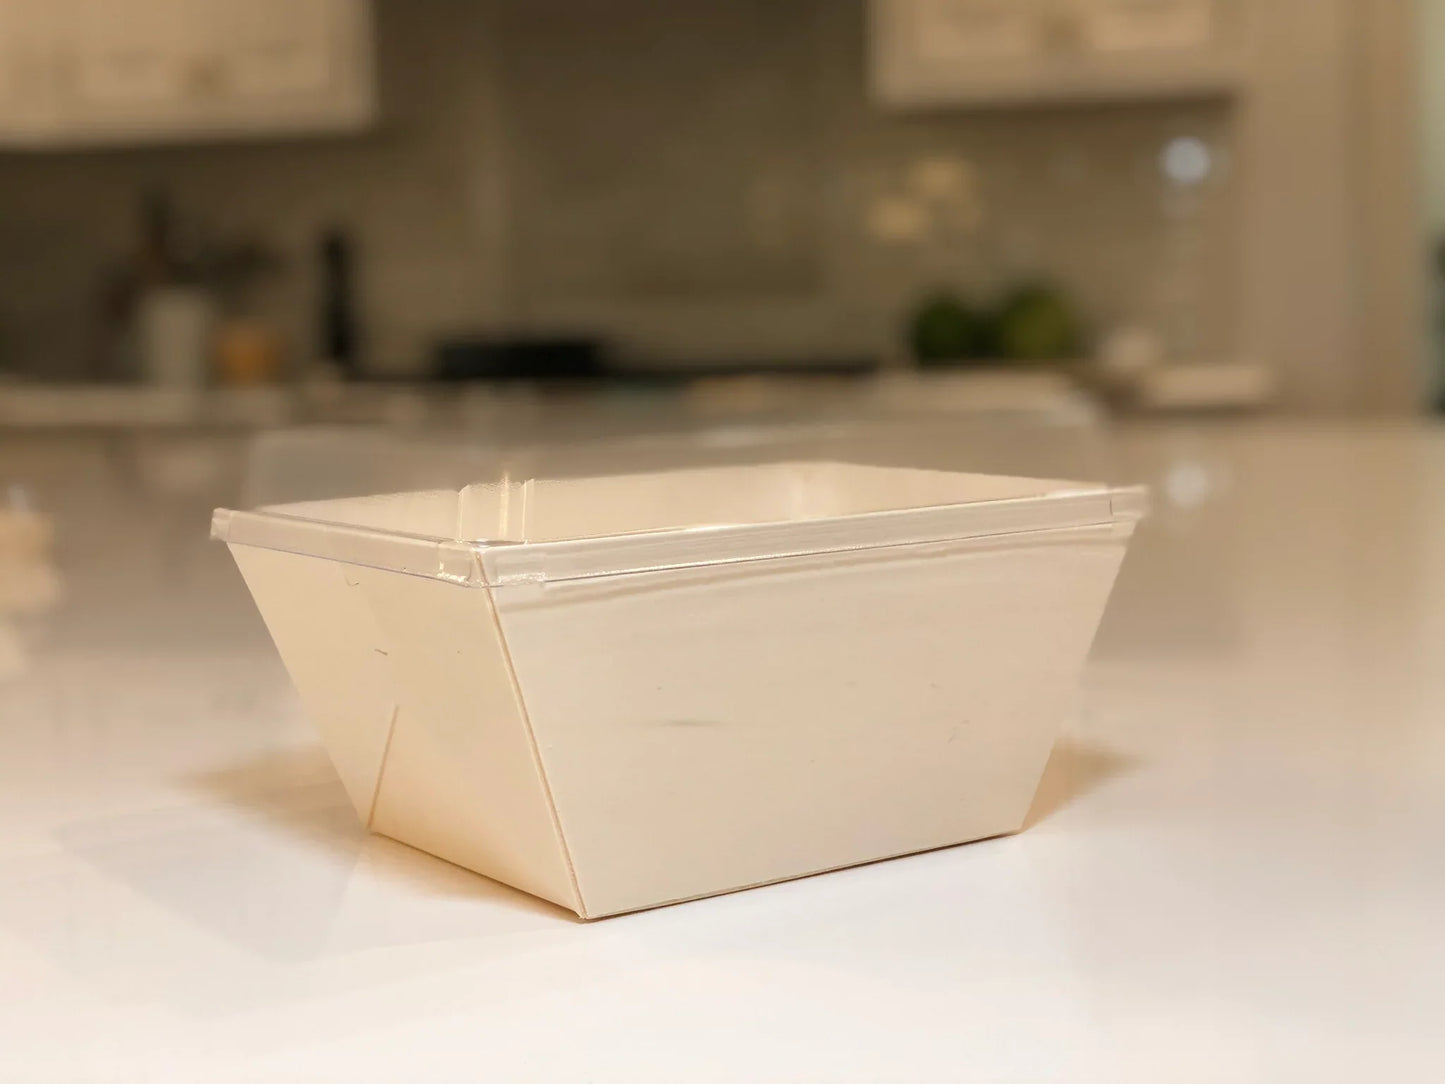 6" X 8" X 3" Covered Tray Set | Compostable Balsa Tray with RPET Lid | 100 of each (Case of 100)